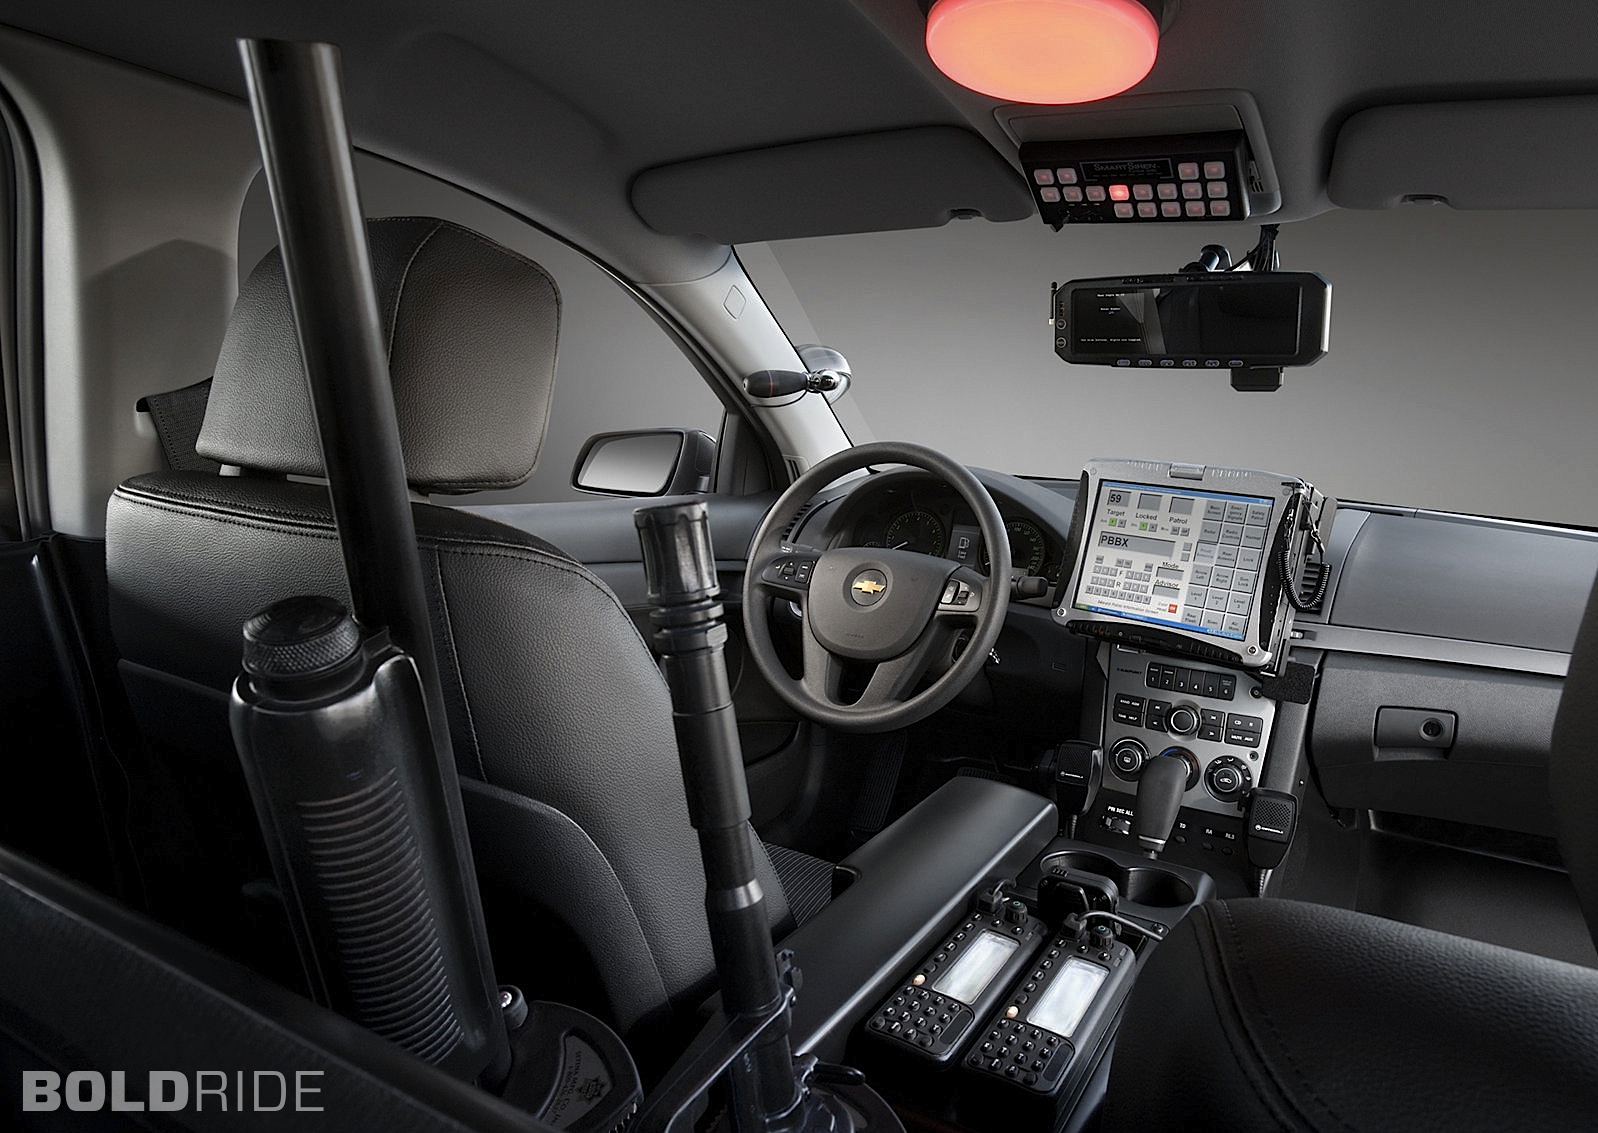 2012, Chevrolet, Caprice, Police, Muscle, Interior, Computer, Weapon, Weapons, Guns, Gun Wallpaper